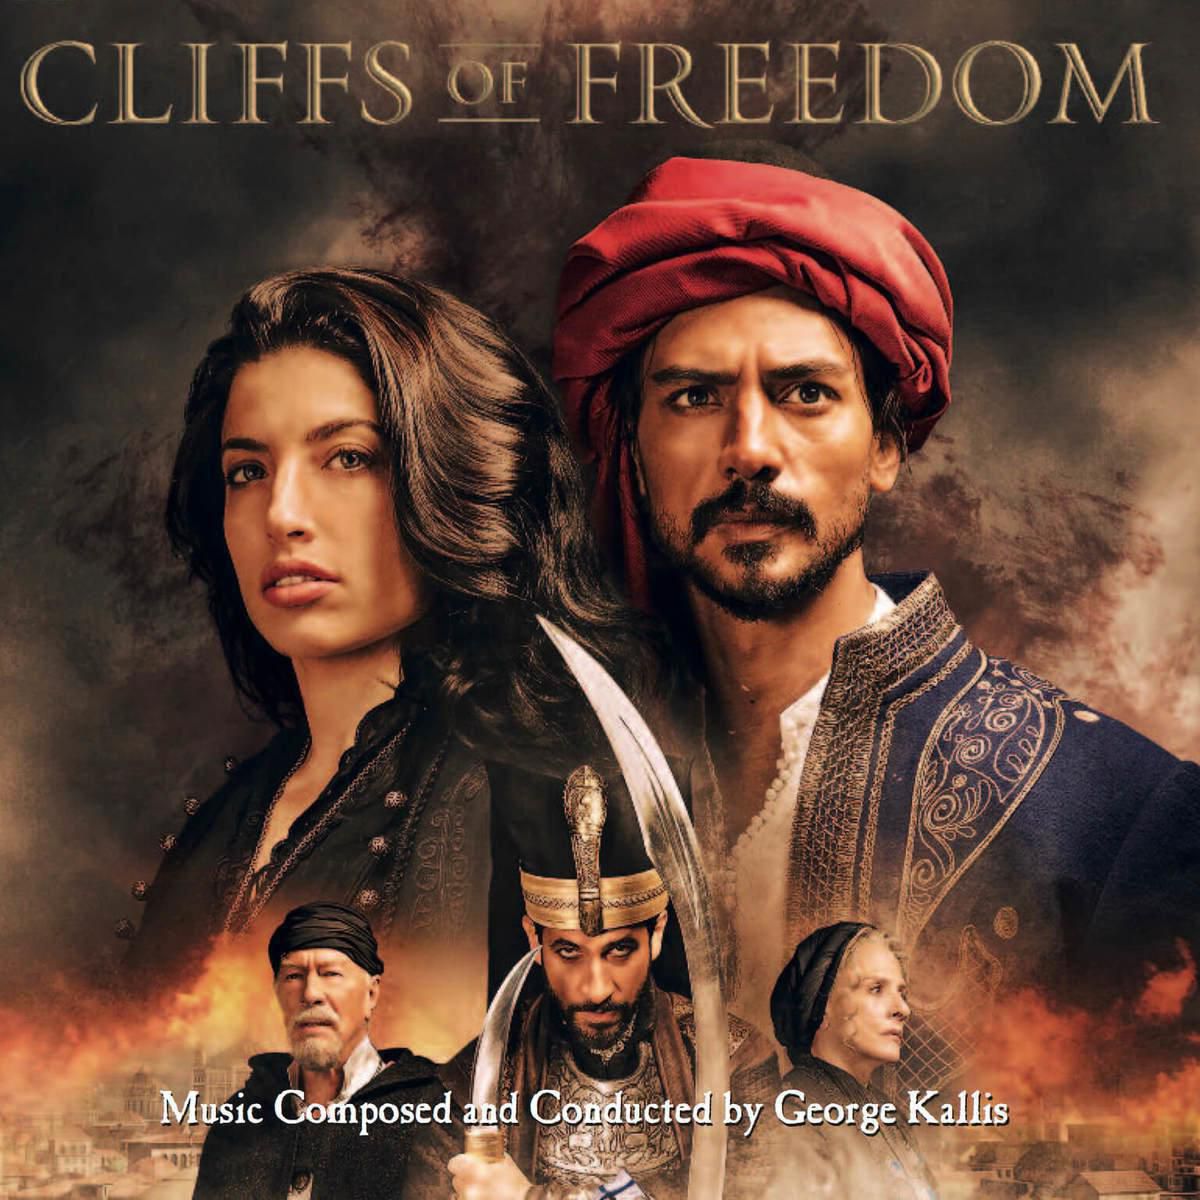 01 Ciffs of Freedom Soundtrack Cover